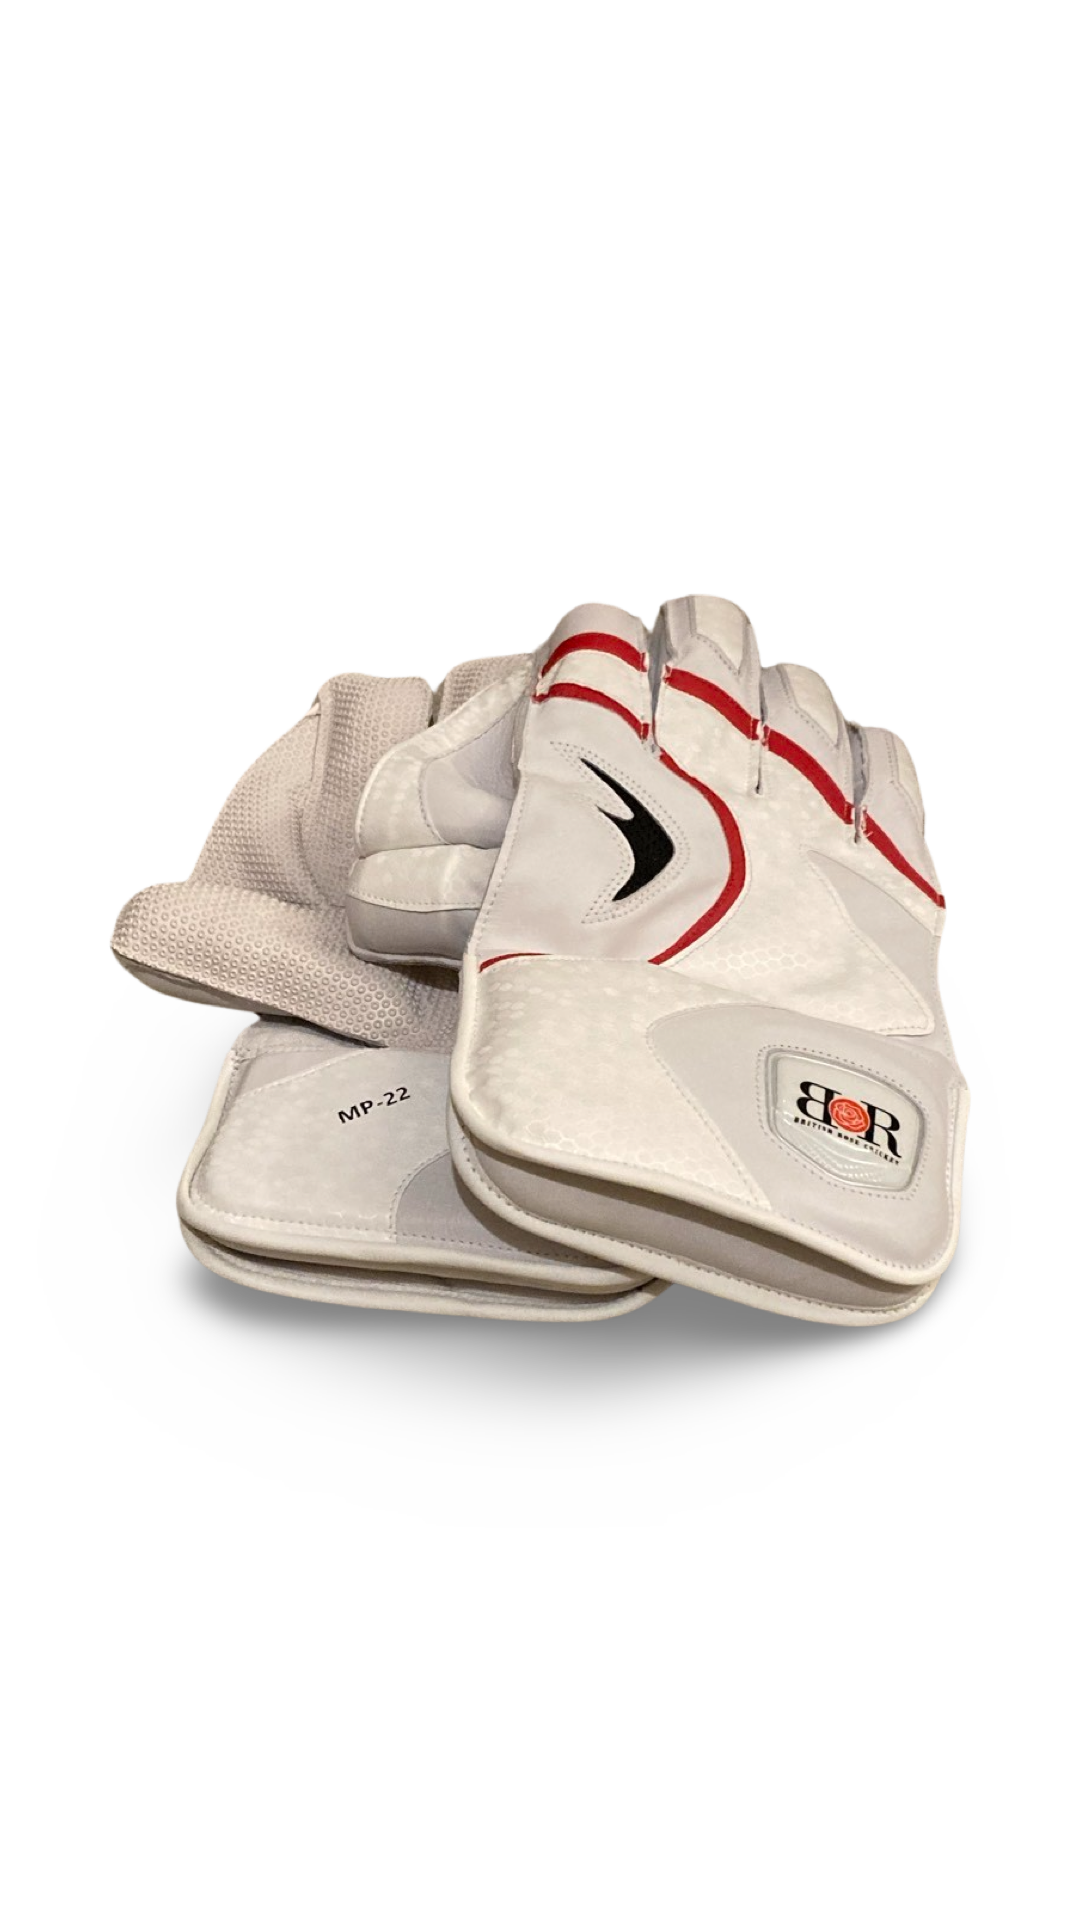 MP-22 Wicket Keeping Gloves